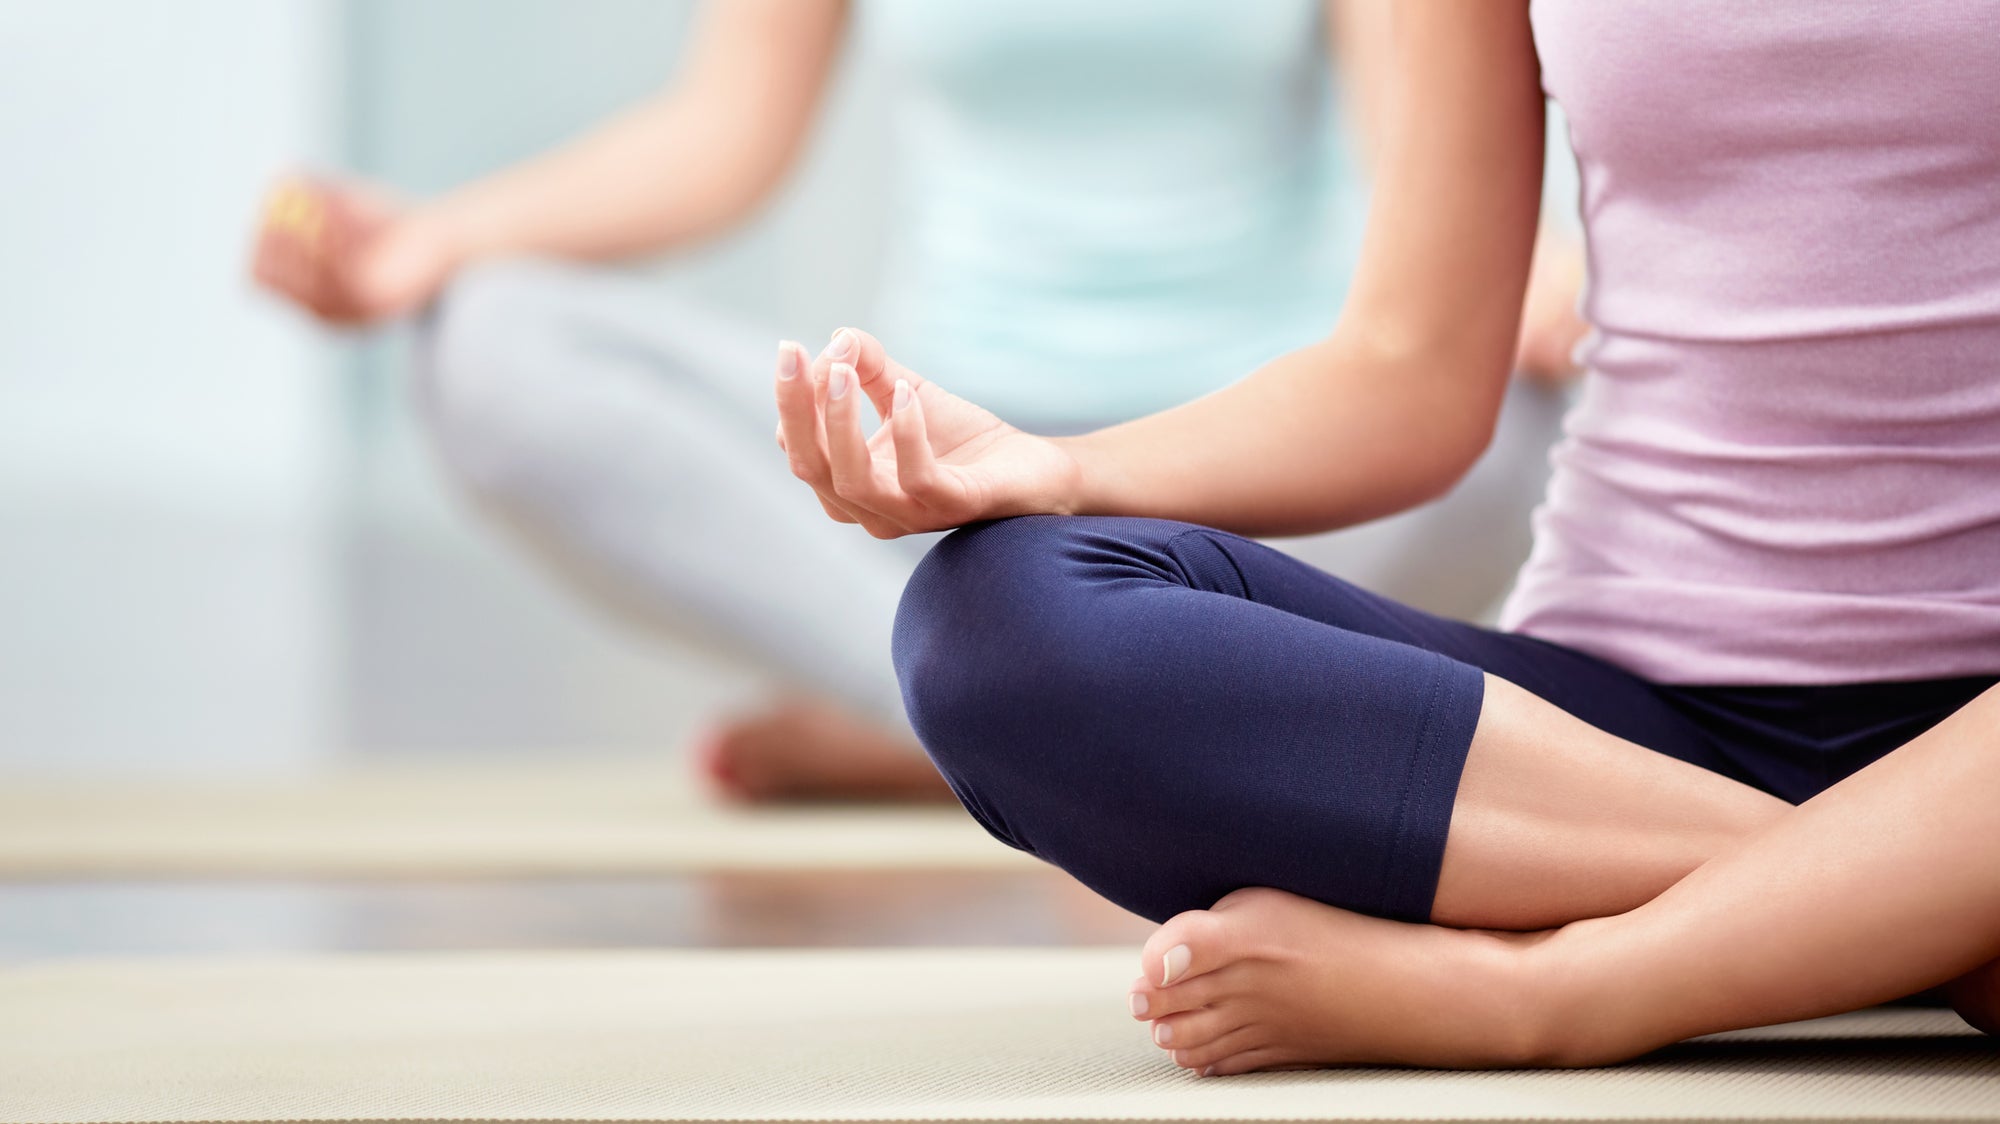 How Does Yoga Relieve Chronic Pain?